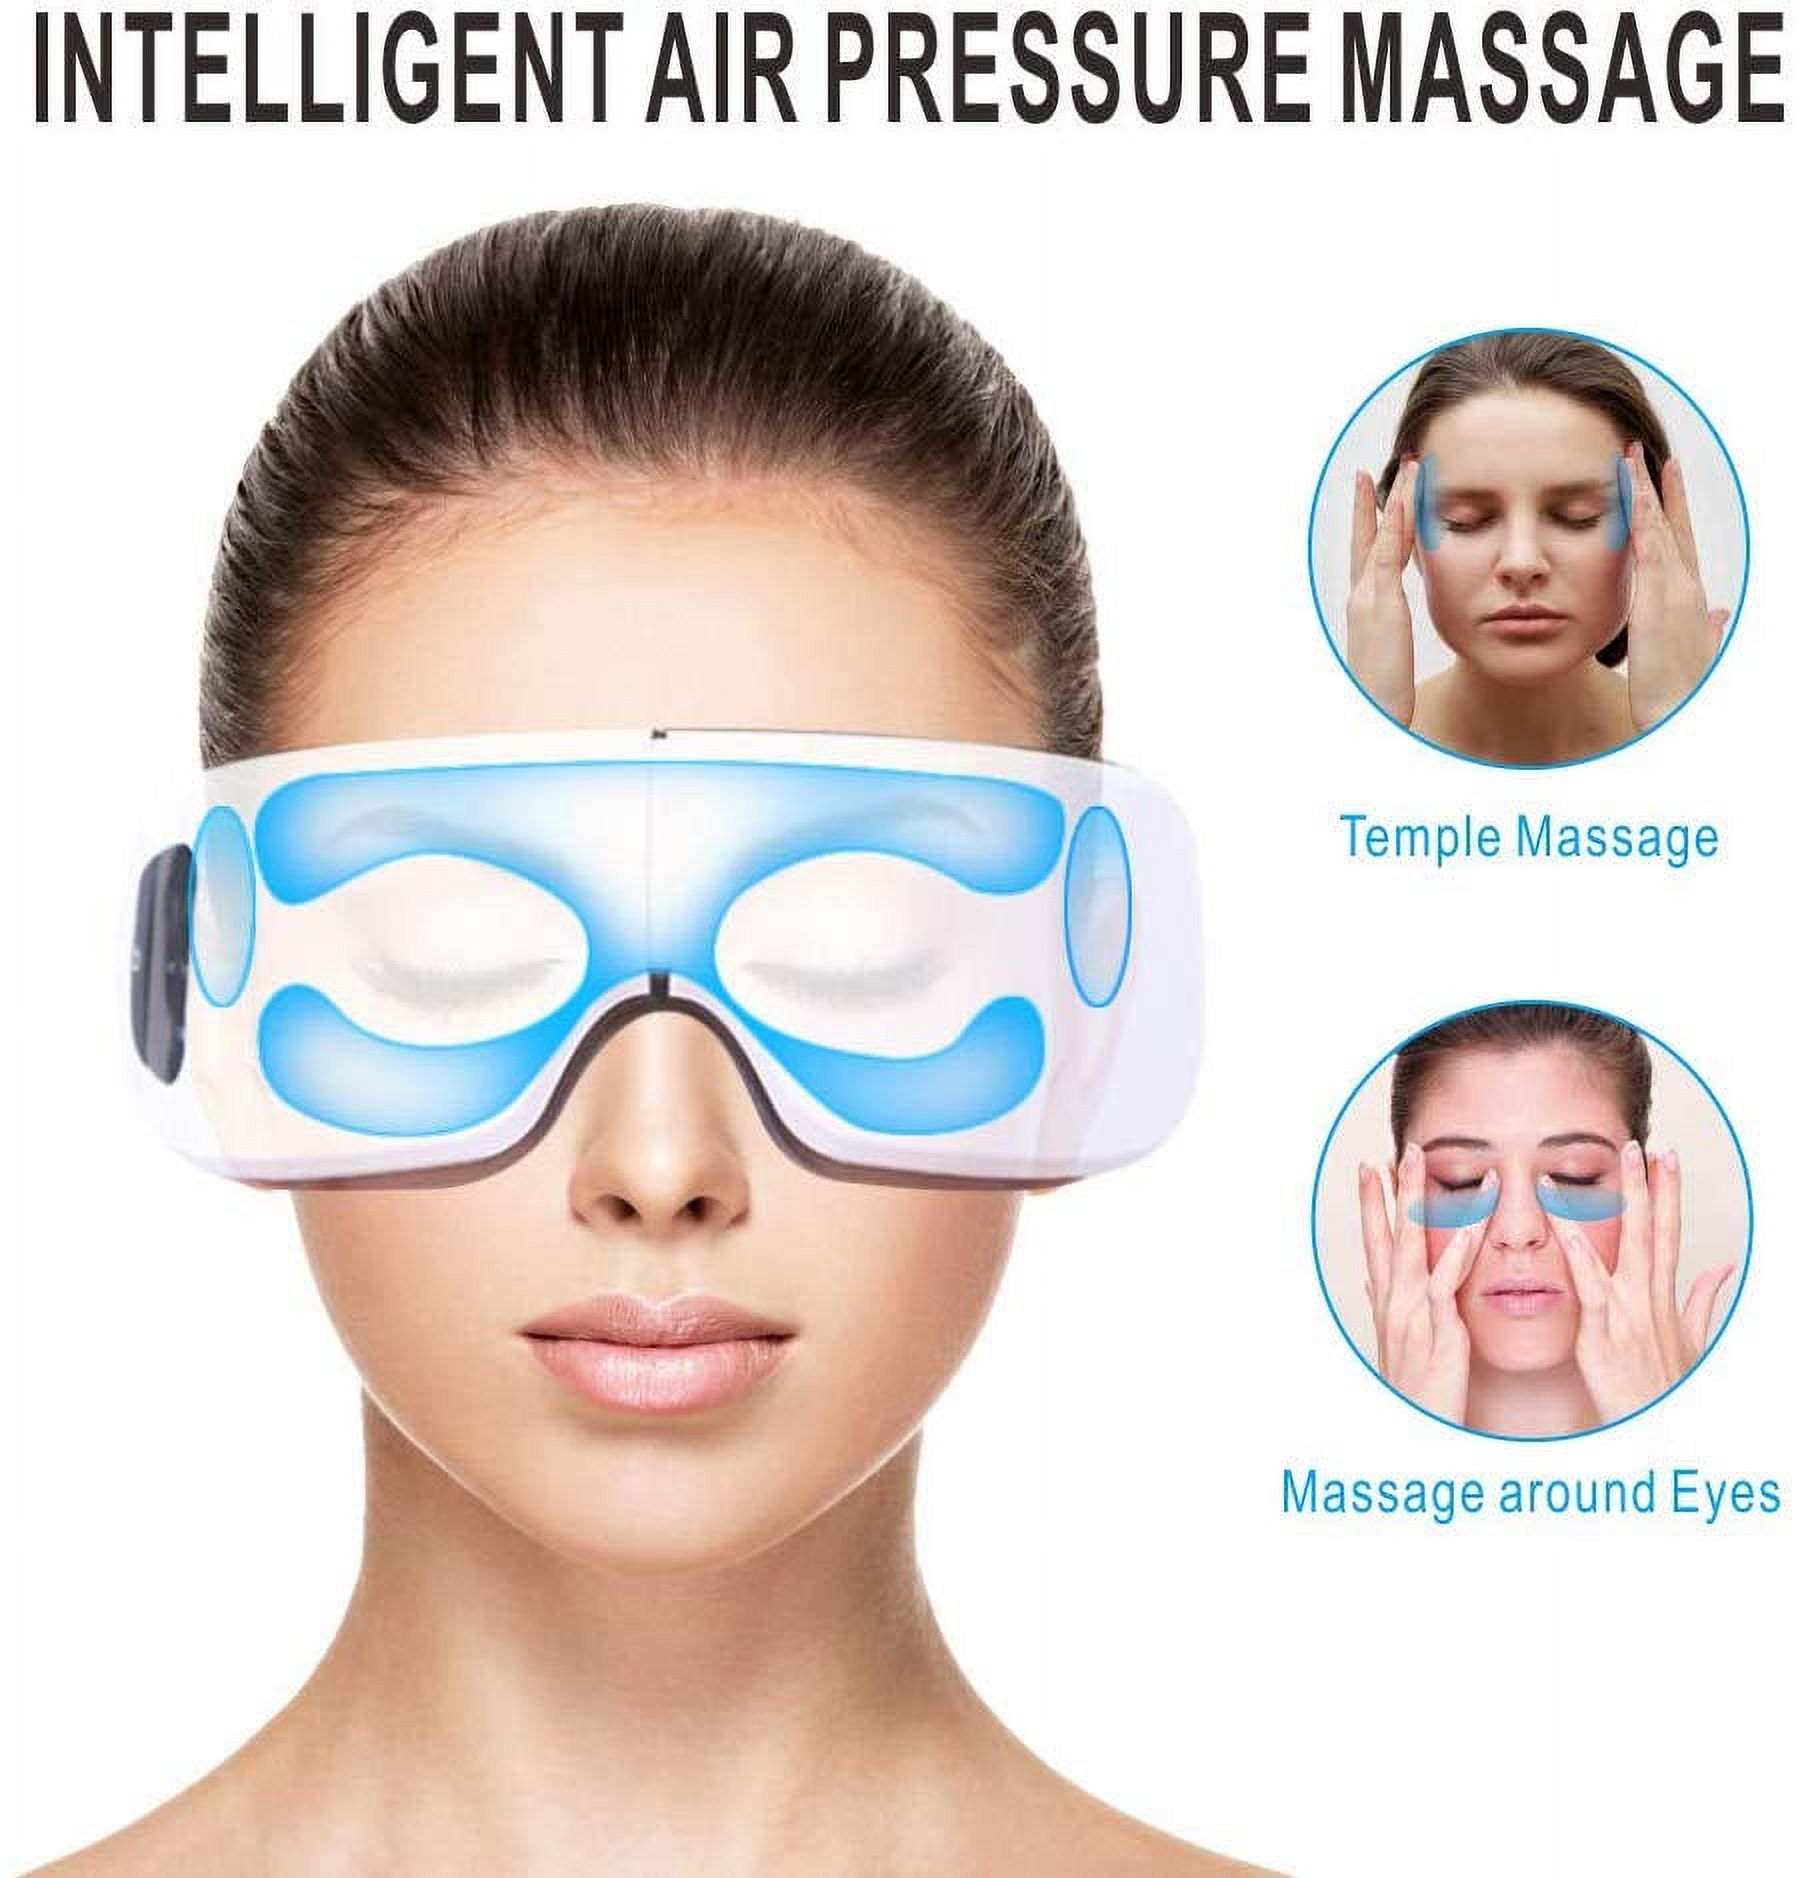 "Happyline" Electric Eye Massager with Heat, Air Compression, Bluetooth Music, Wireless Eye and Temple Massager for Relieving Dry Eyes, Eye Fatigue, Improving Blood Circulation and Sleep Quality - image 3 of 7